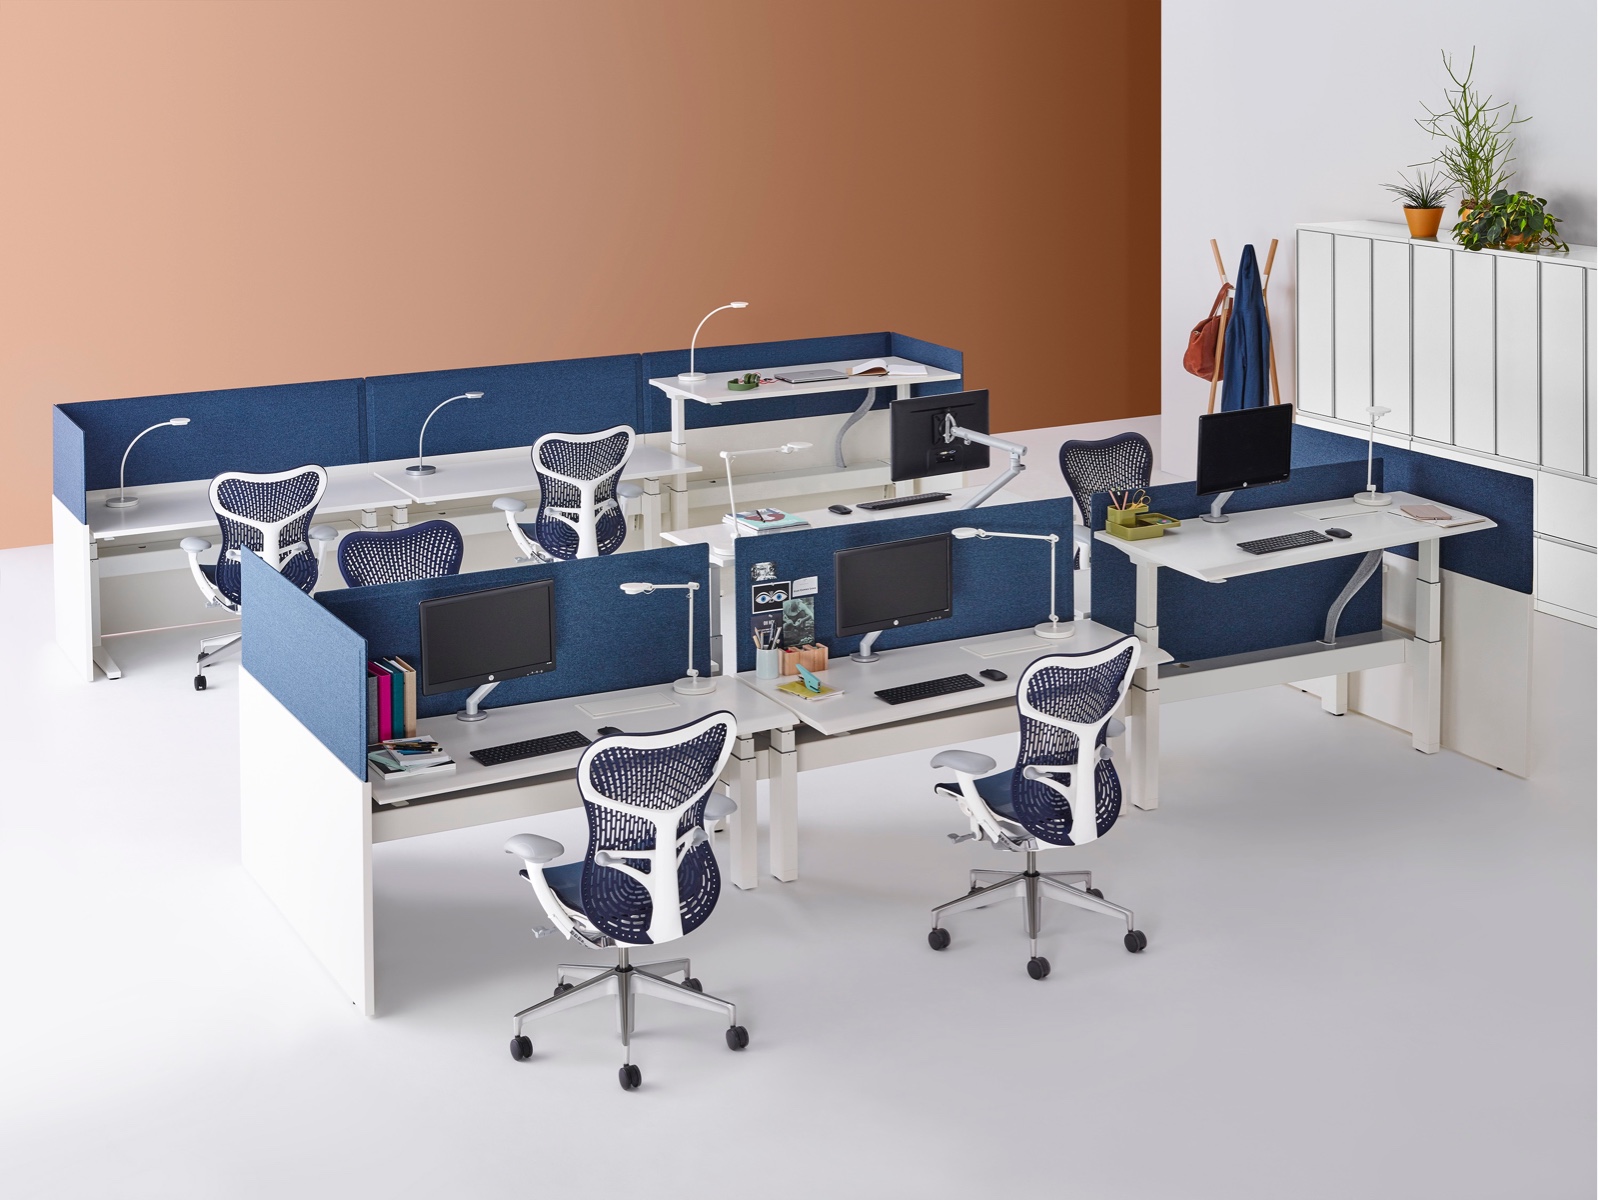 Two rows of Renew Link benching configurations with desks positioned at different heights, dark blue privacy screens, and dark blue Mirra 2 Chairs.